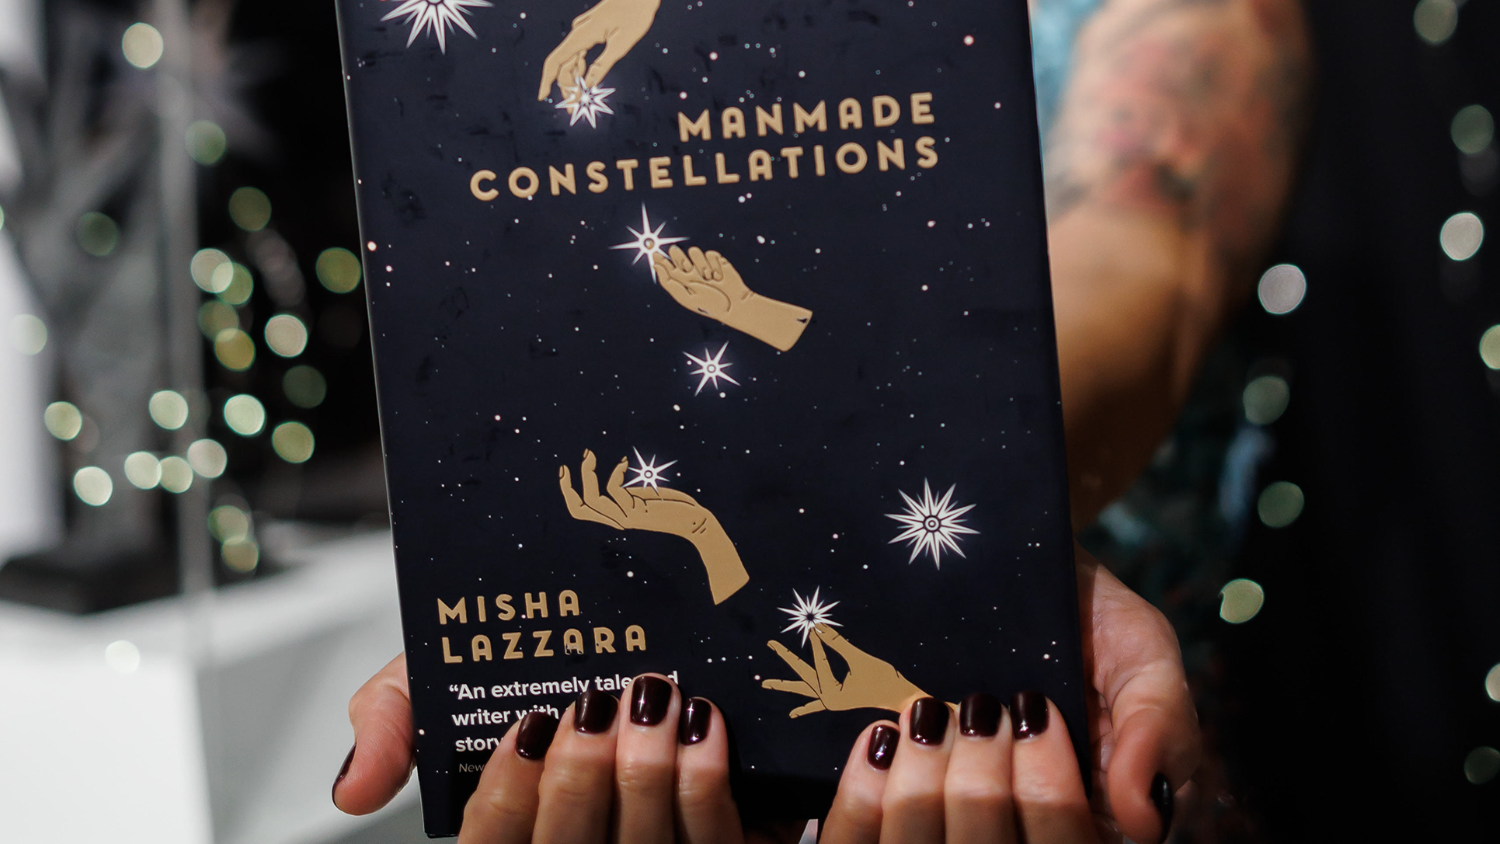 Image of "Manmade Constellations."